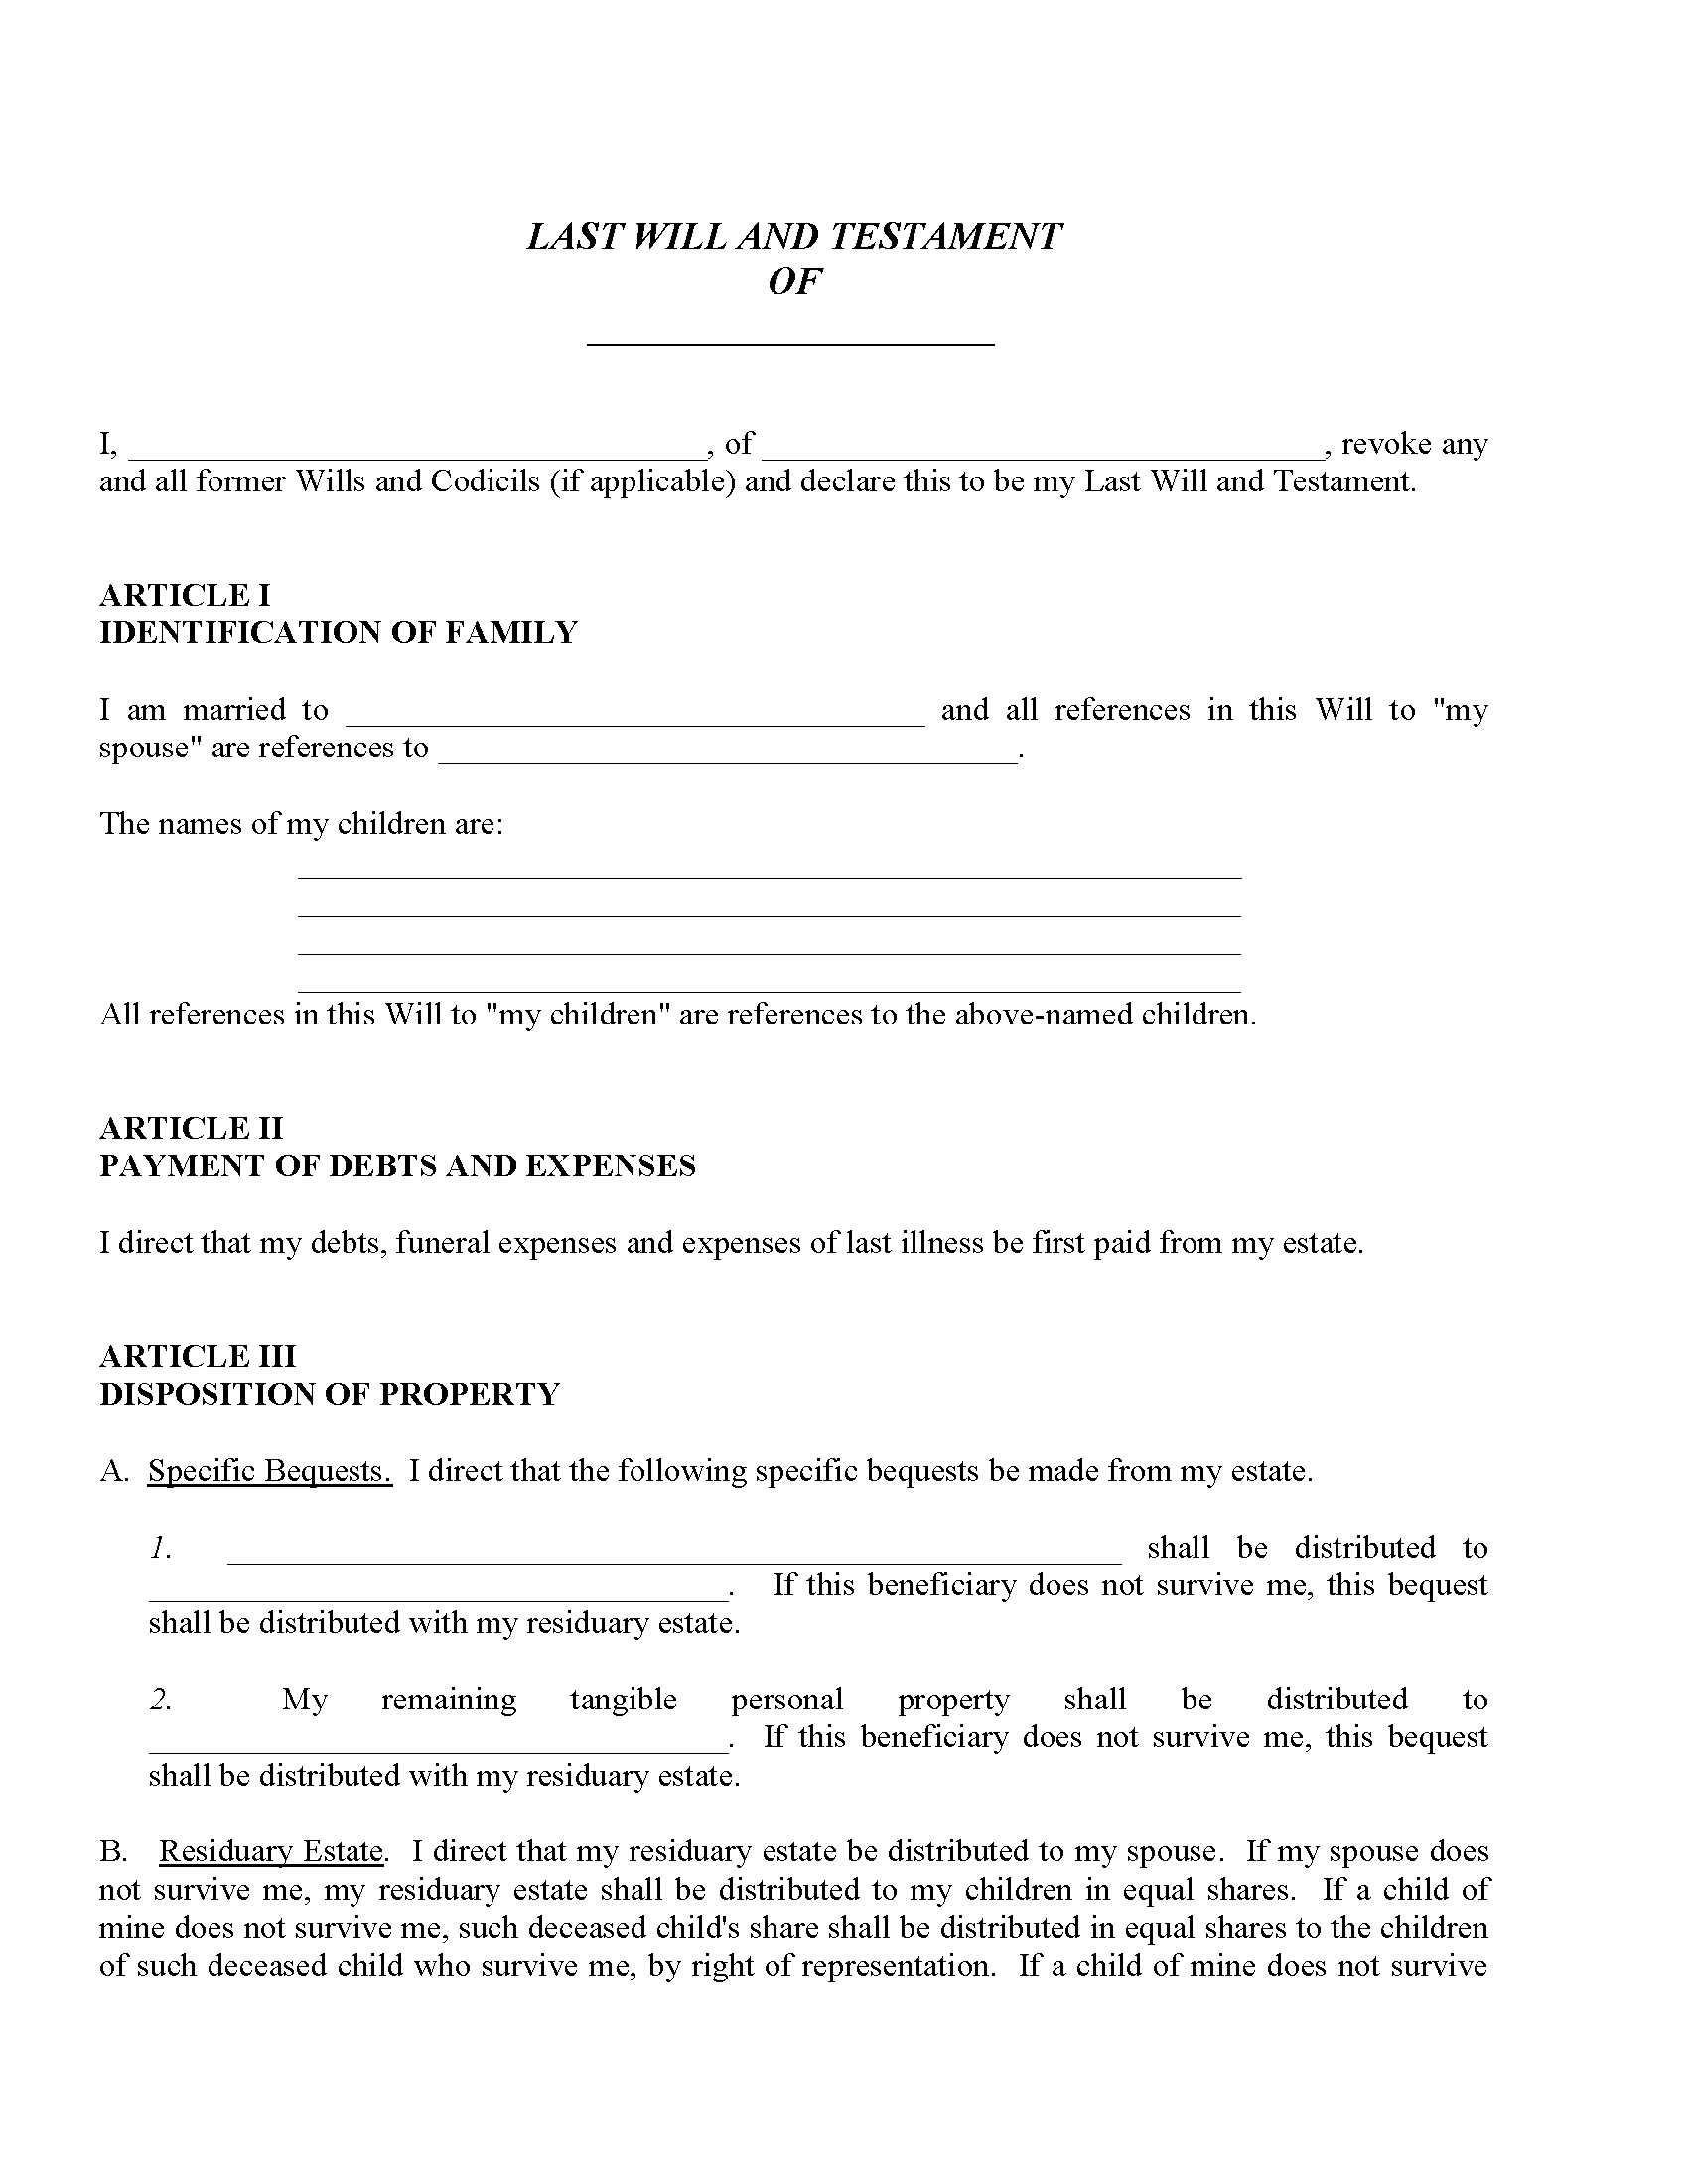 Texas Last Will and Testament Free Printable Legal Forms